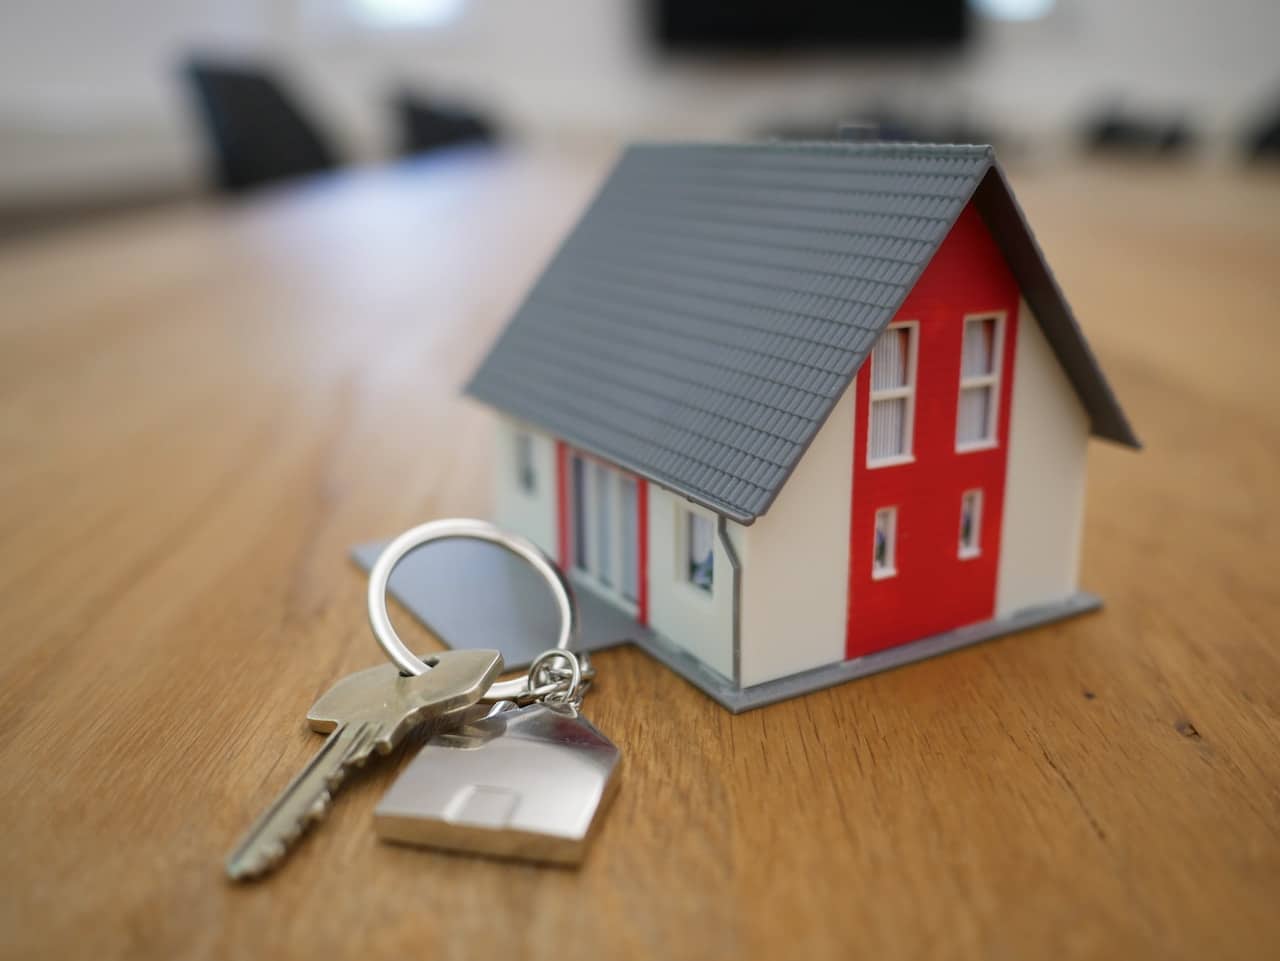 miniature house with key on a table, representing selling a house